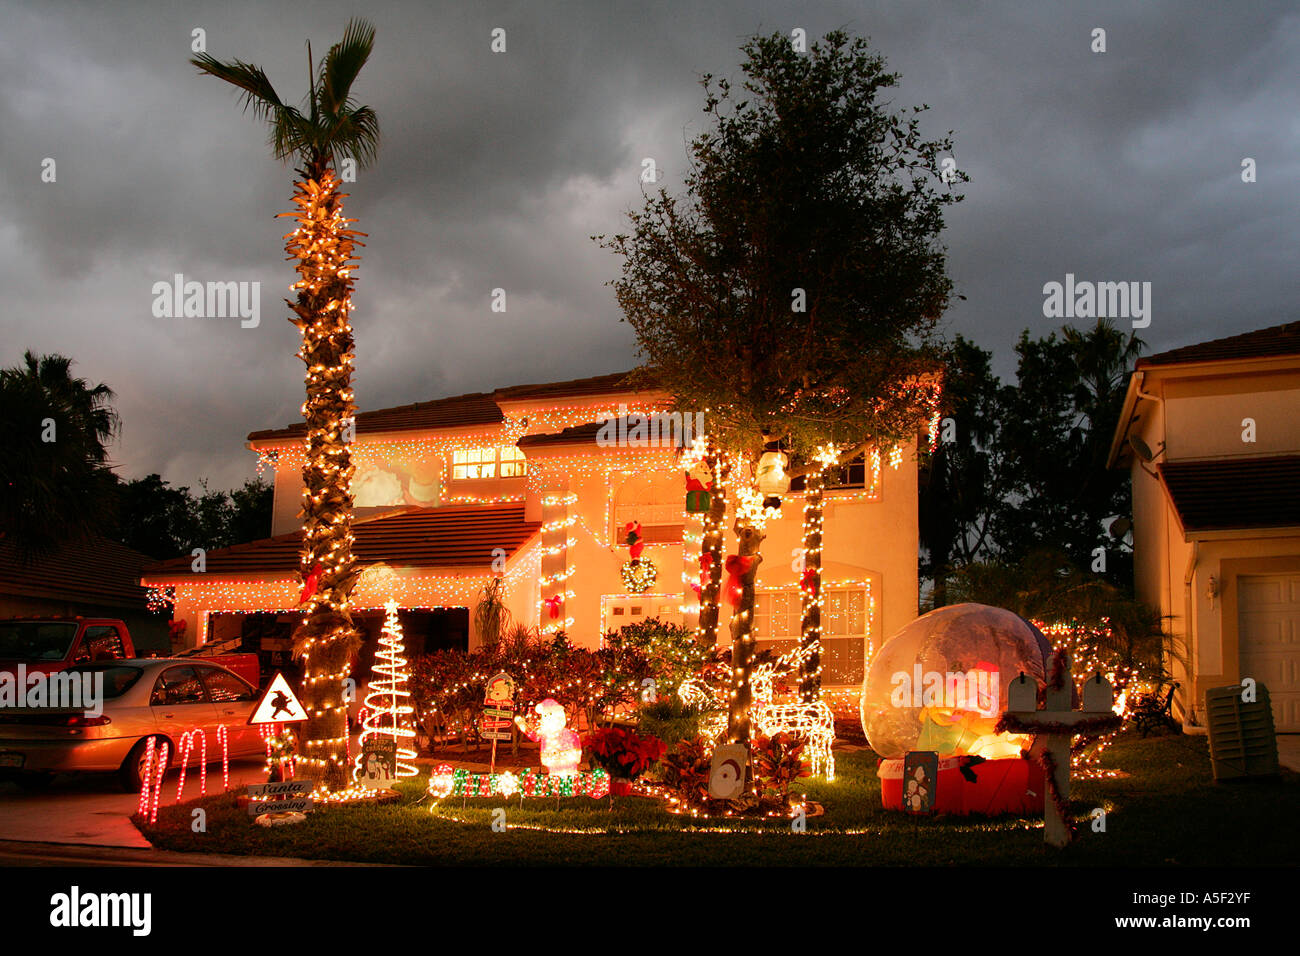 Christmas decorations front garden night time twinkling lights palm tree  hot weather tacky winter holiday tradition residential Stock Photo - Alamy